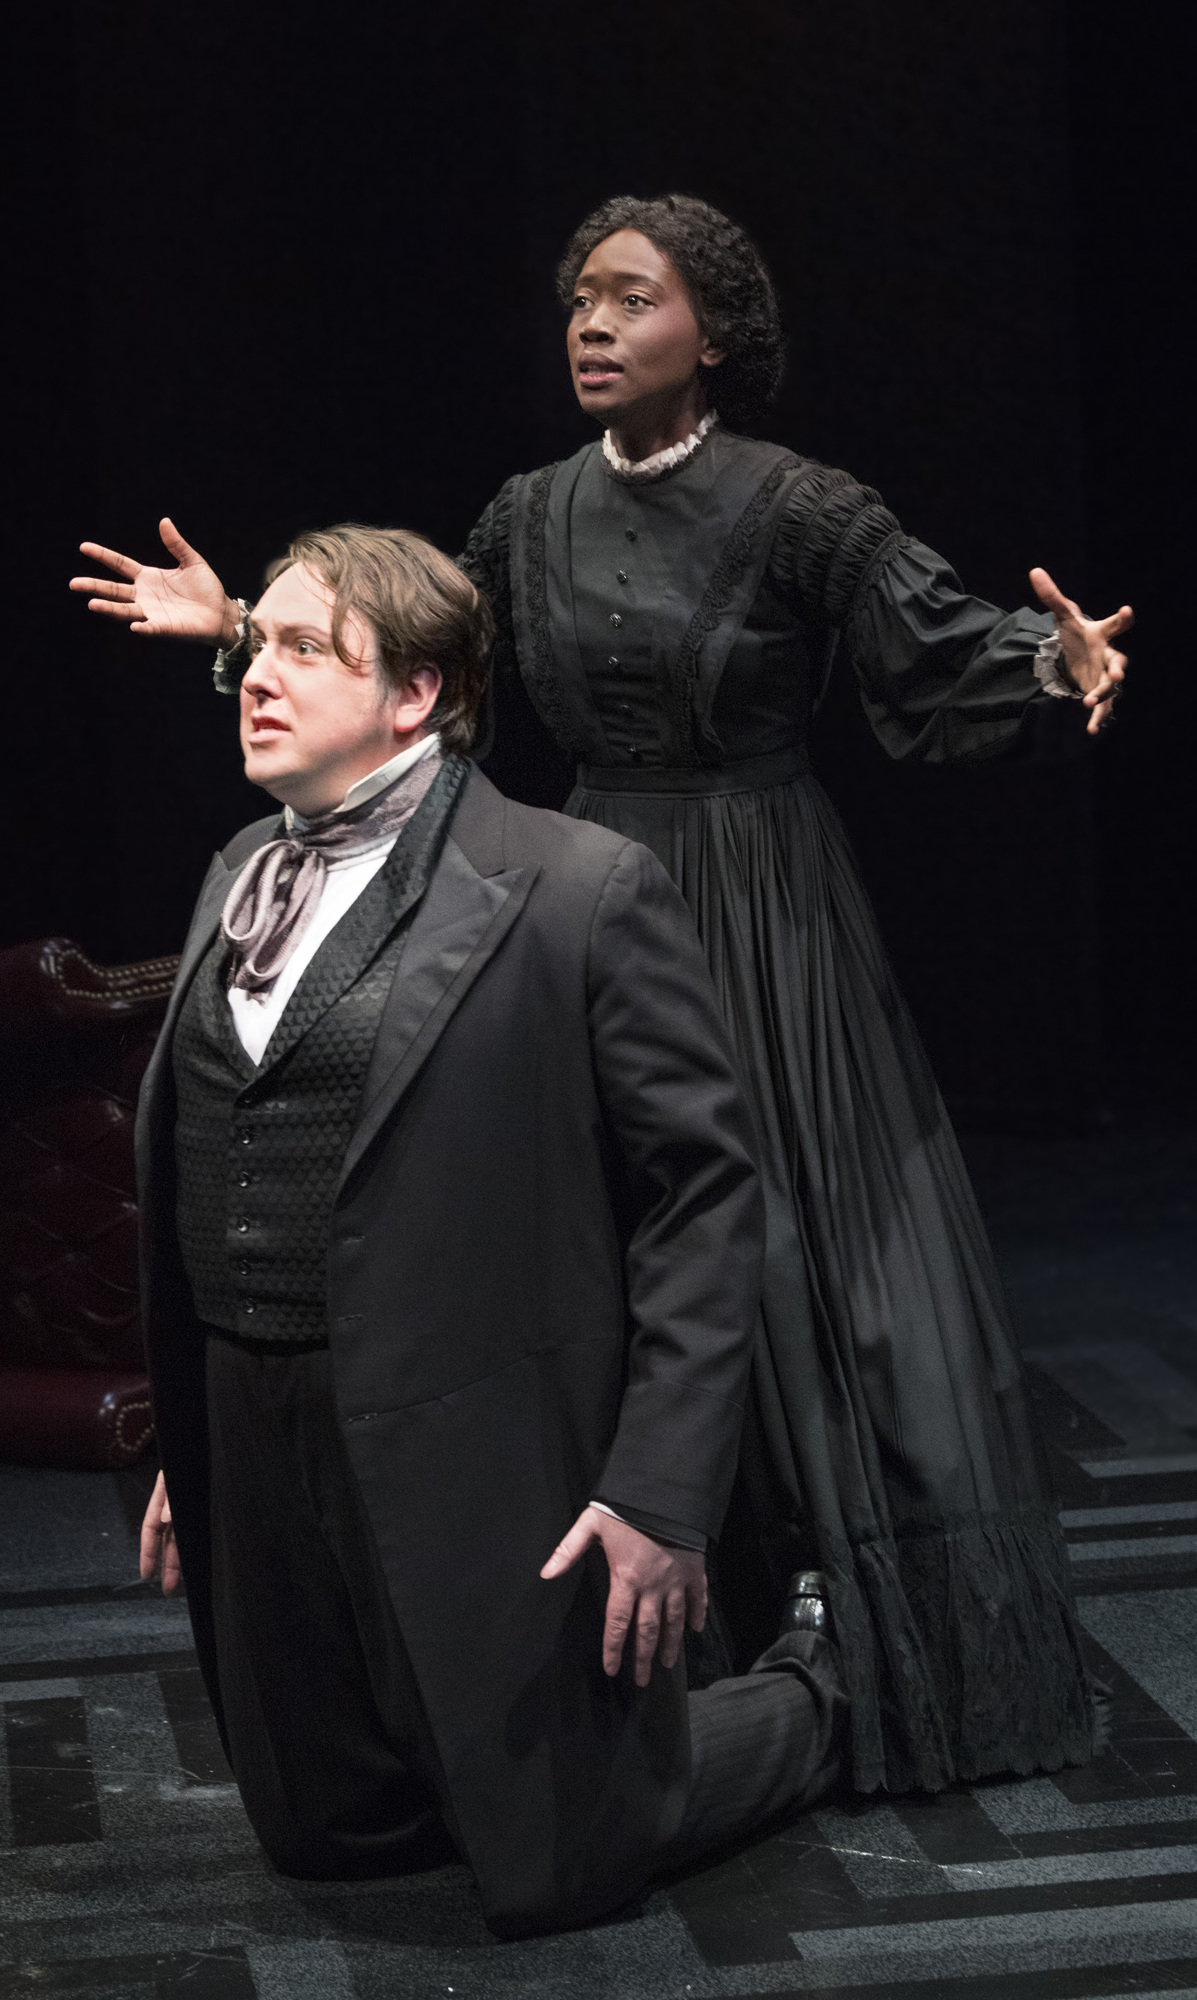 Brian Owen and DeAnna Wright star in “The Turn of the Screw.” Photo by Cliff Roles